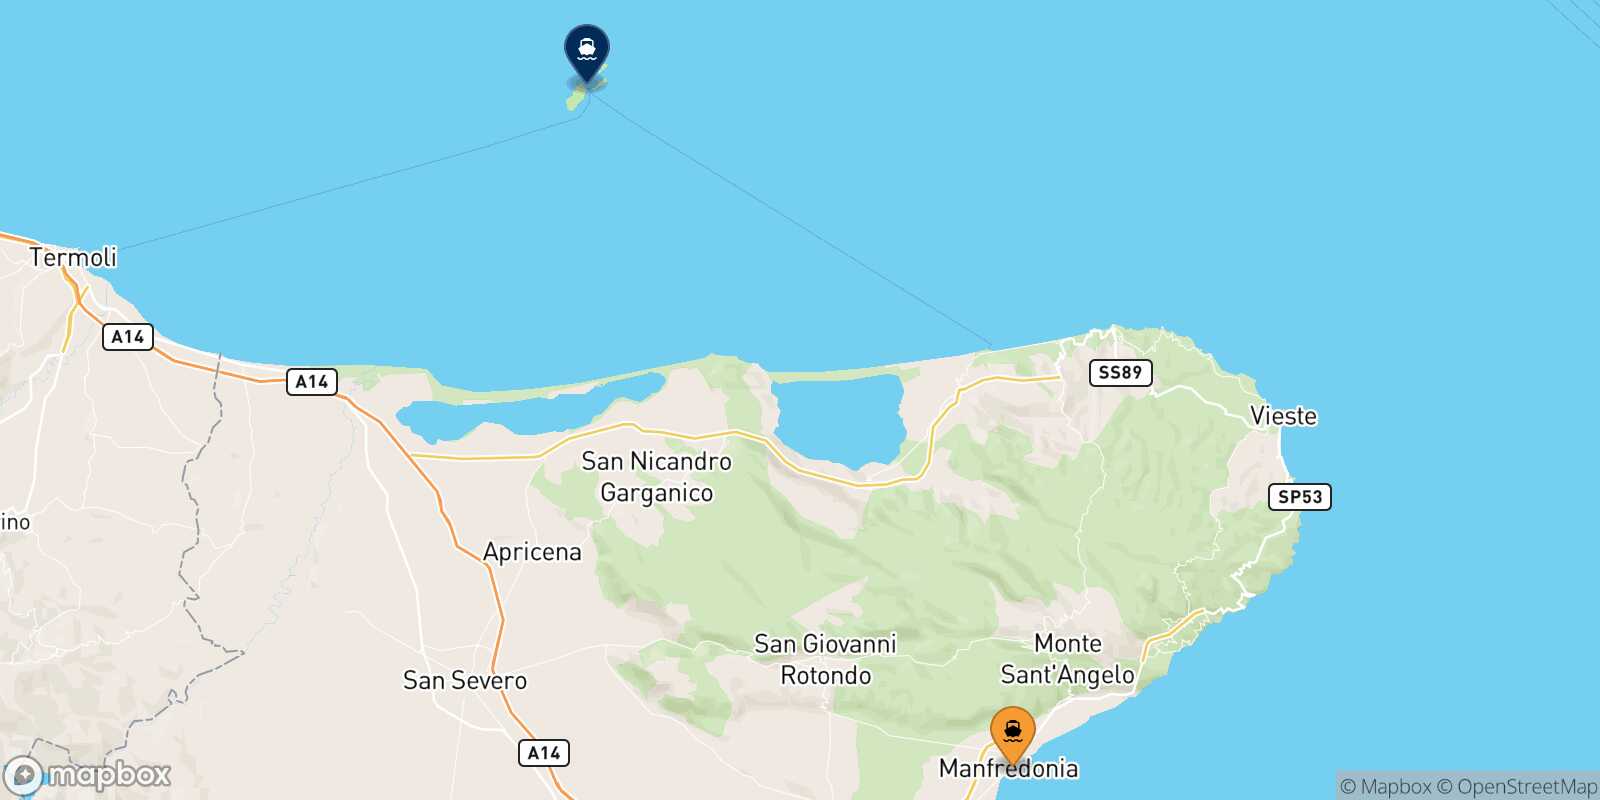 Map of the destinations reachable from Manfredonia